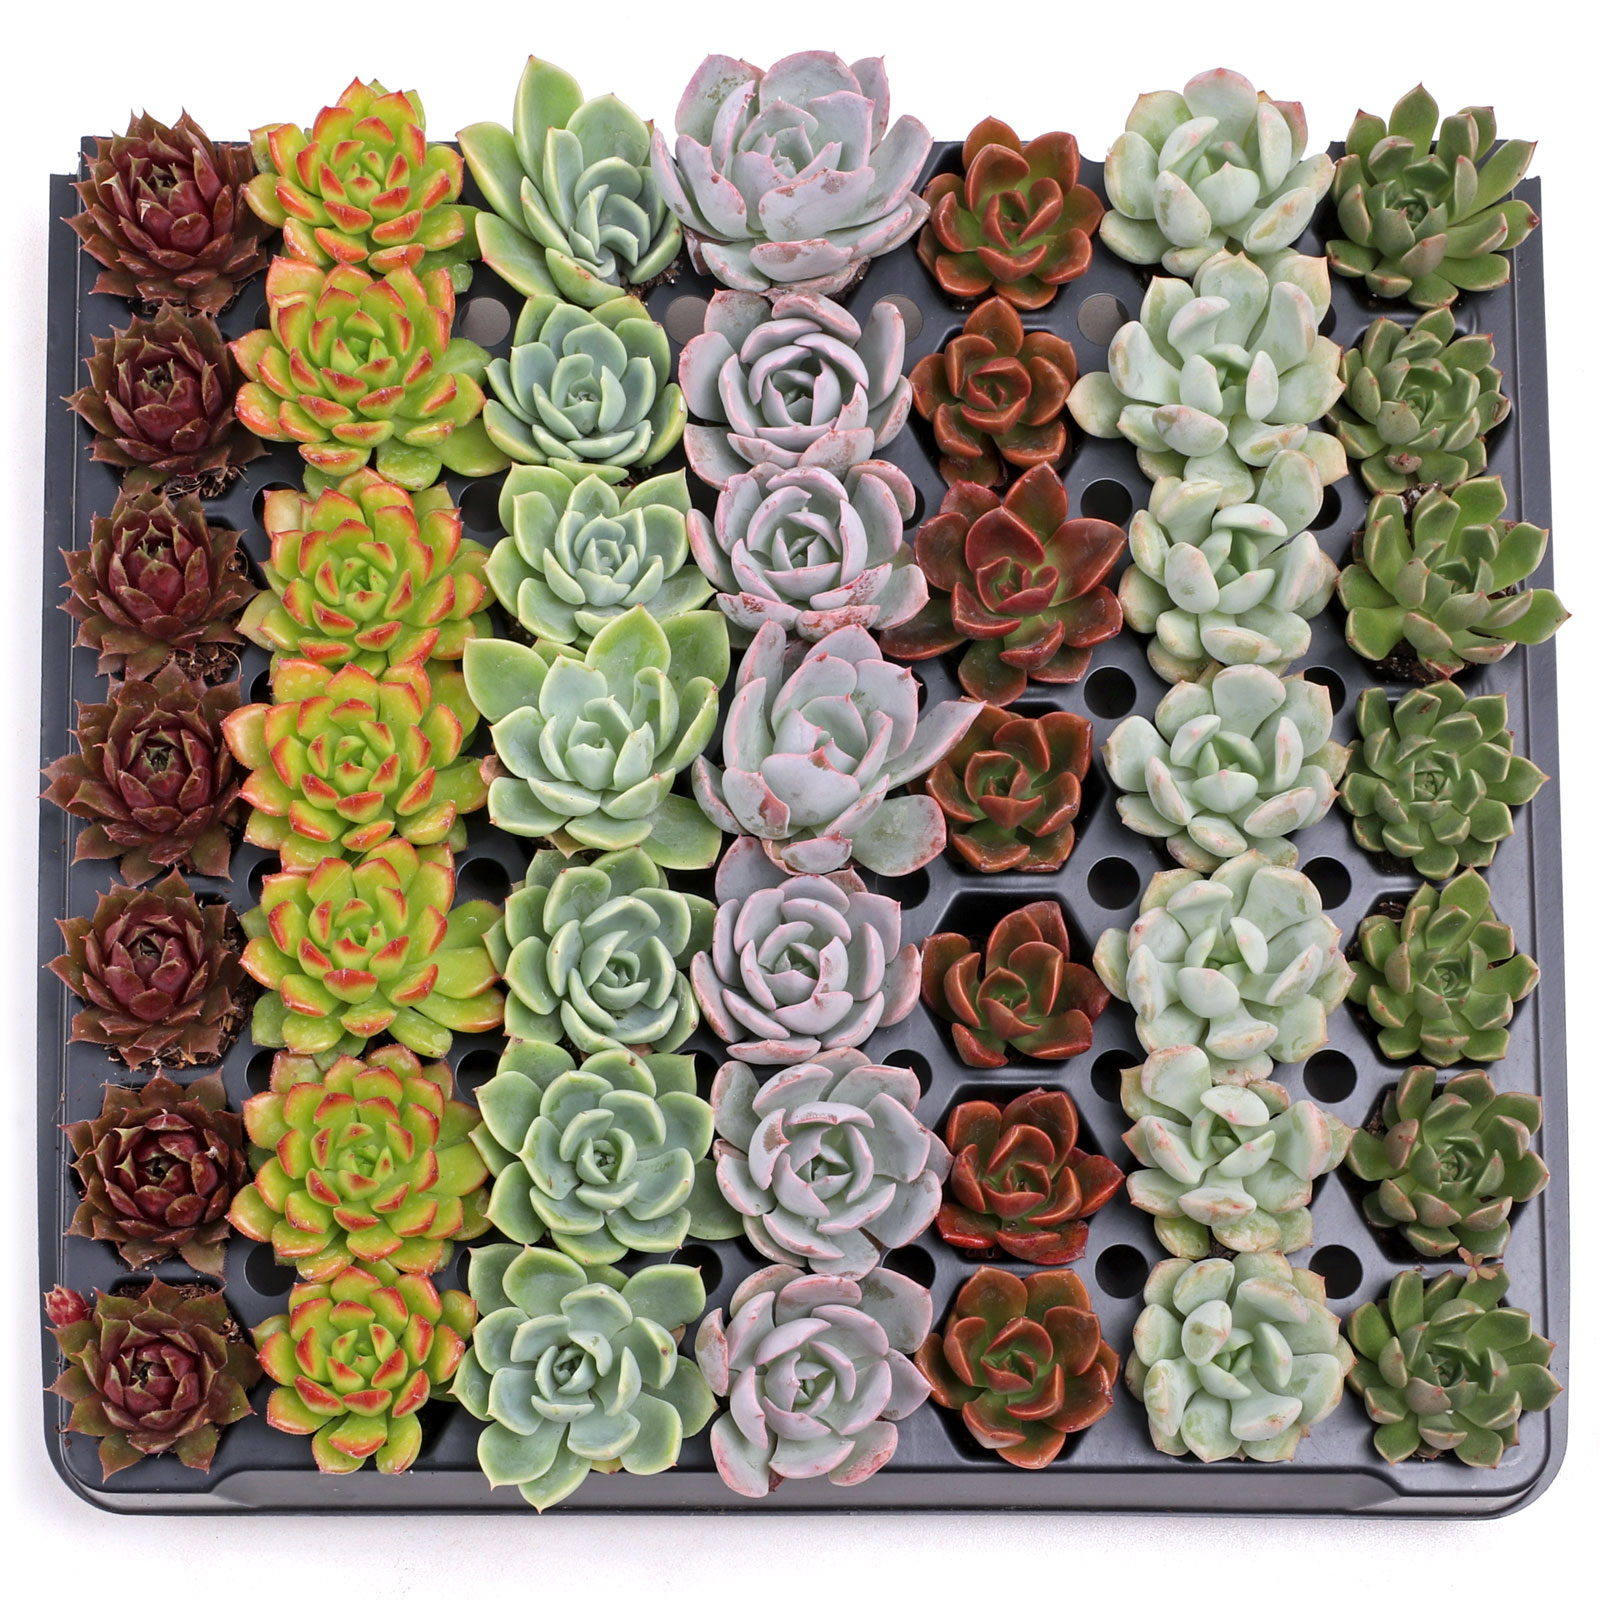 Rosette Succulent 49 Plug Tray - 7 Varieties Questions & Answers